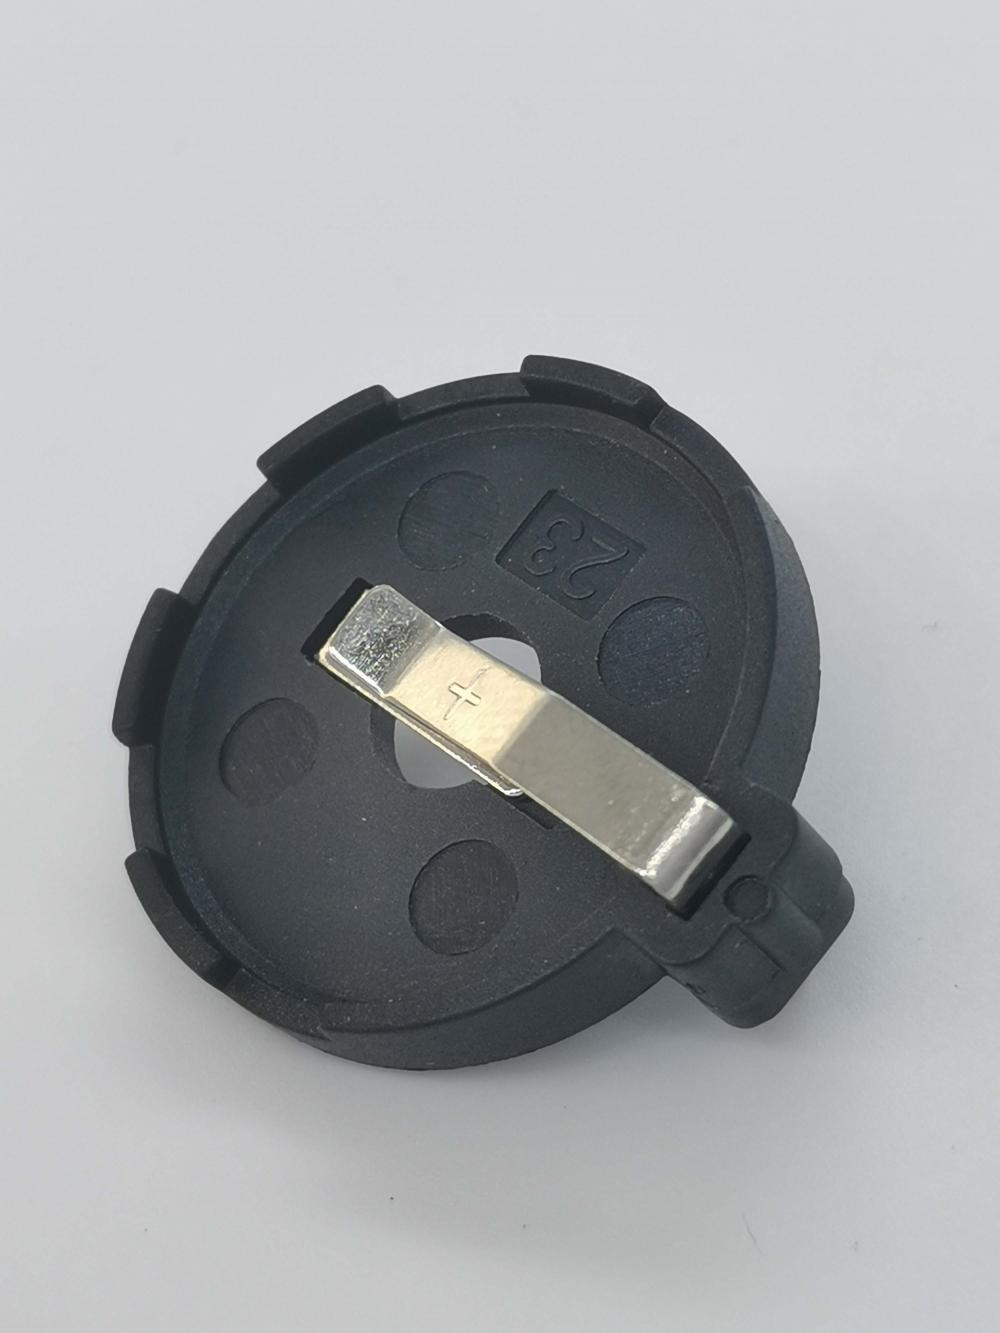 Cr2330a Coin Cell Battery Holders 11